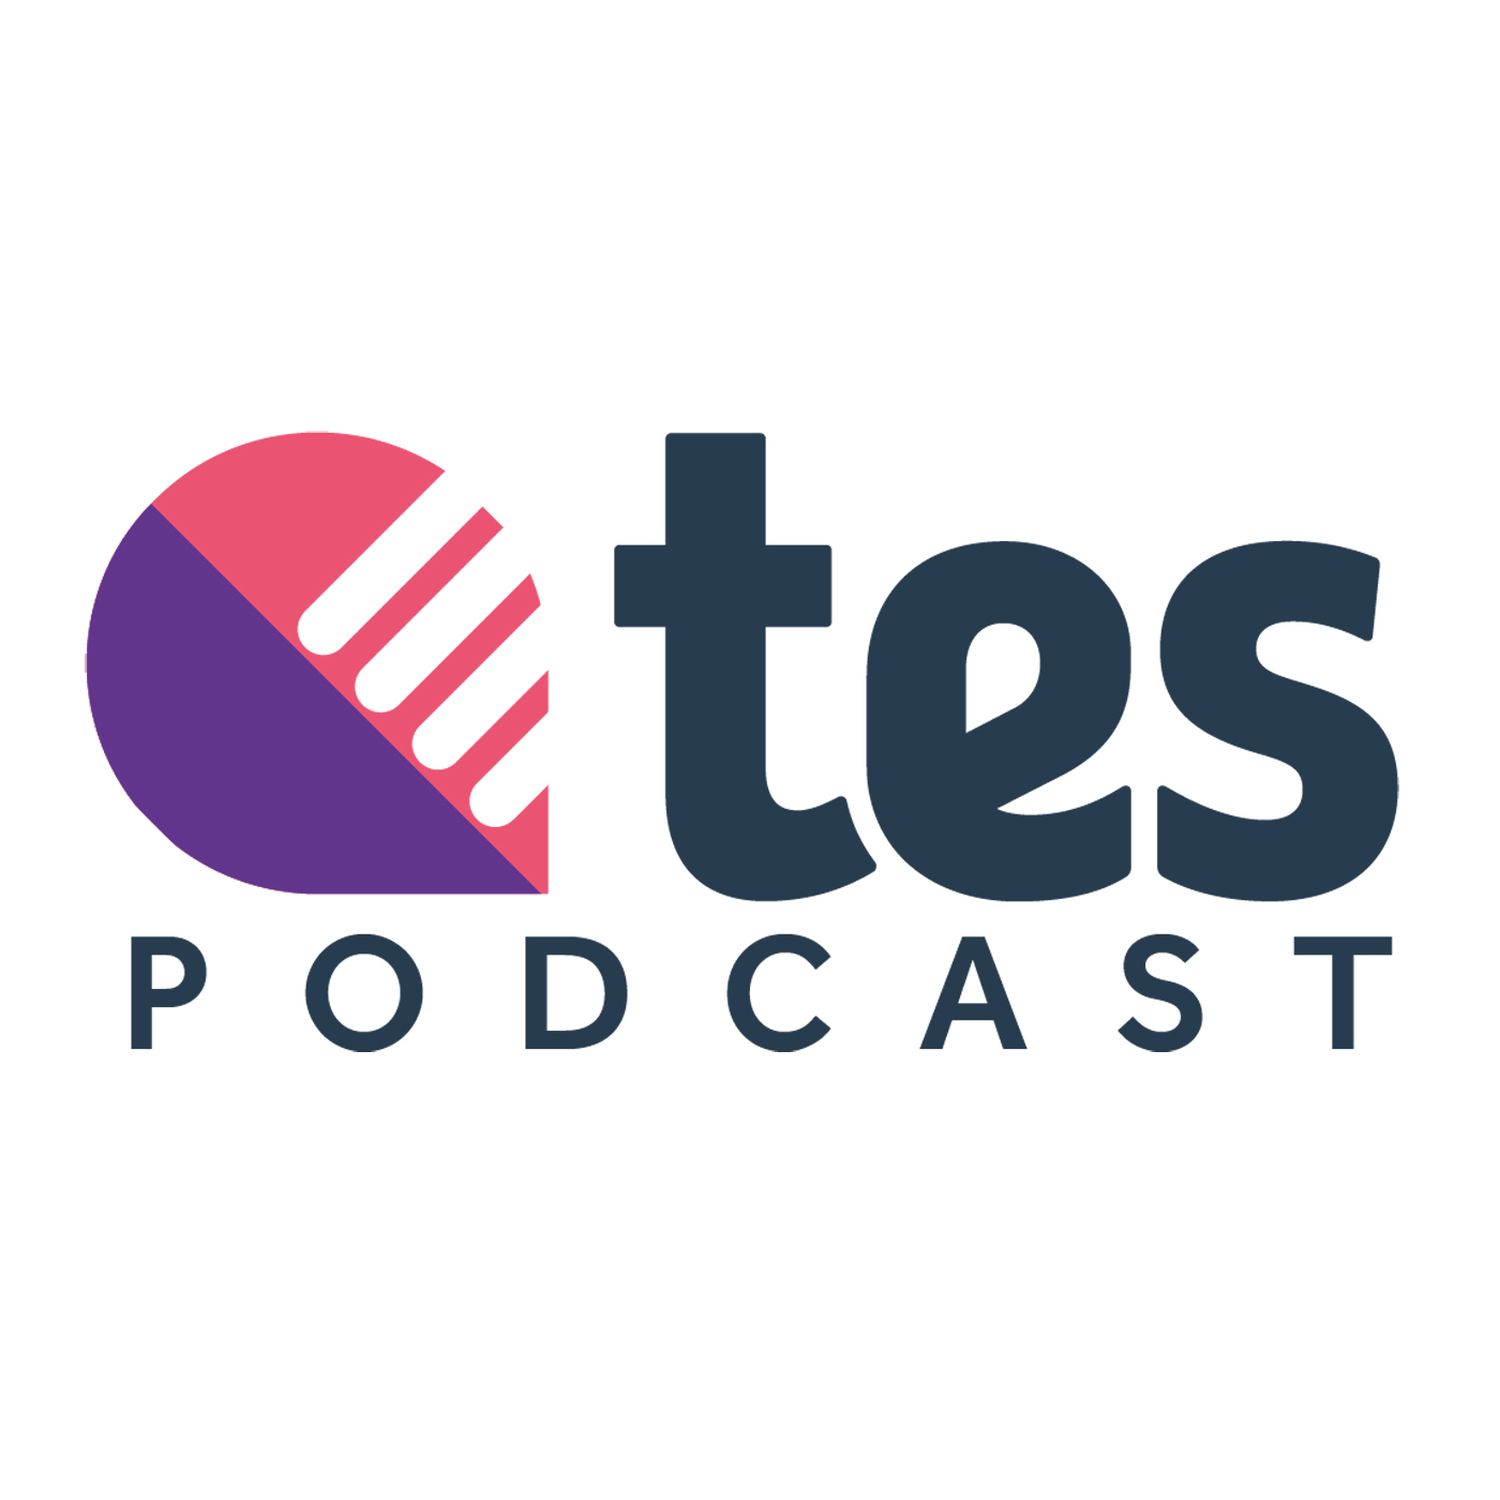 GCSE results day 2019: Tes podcast